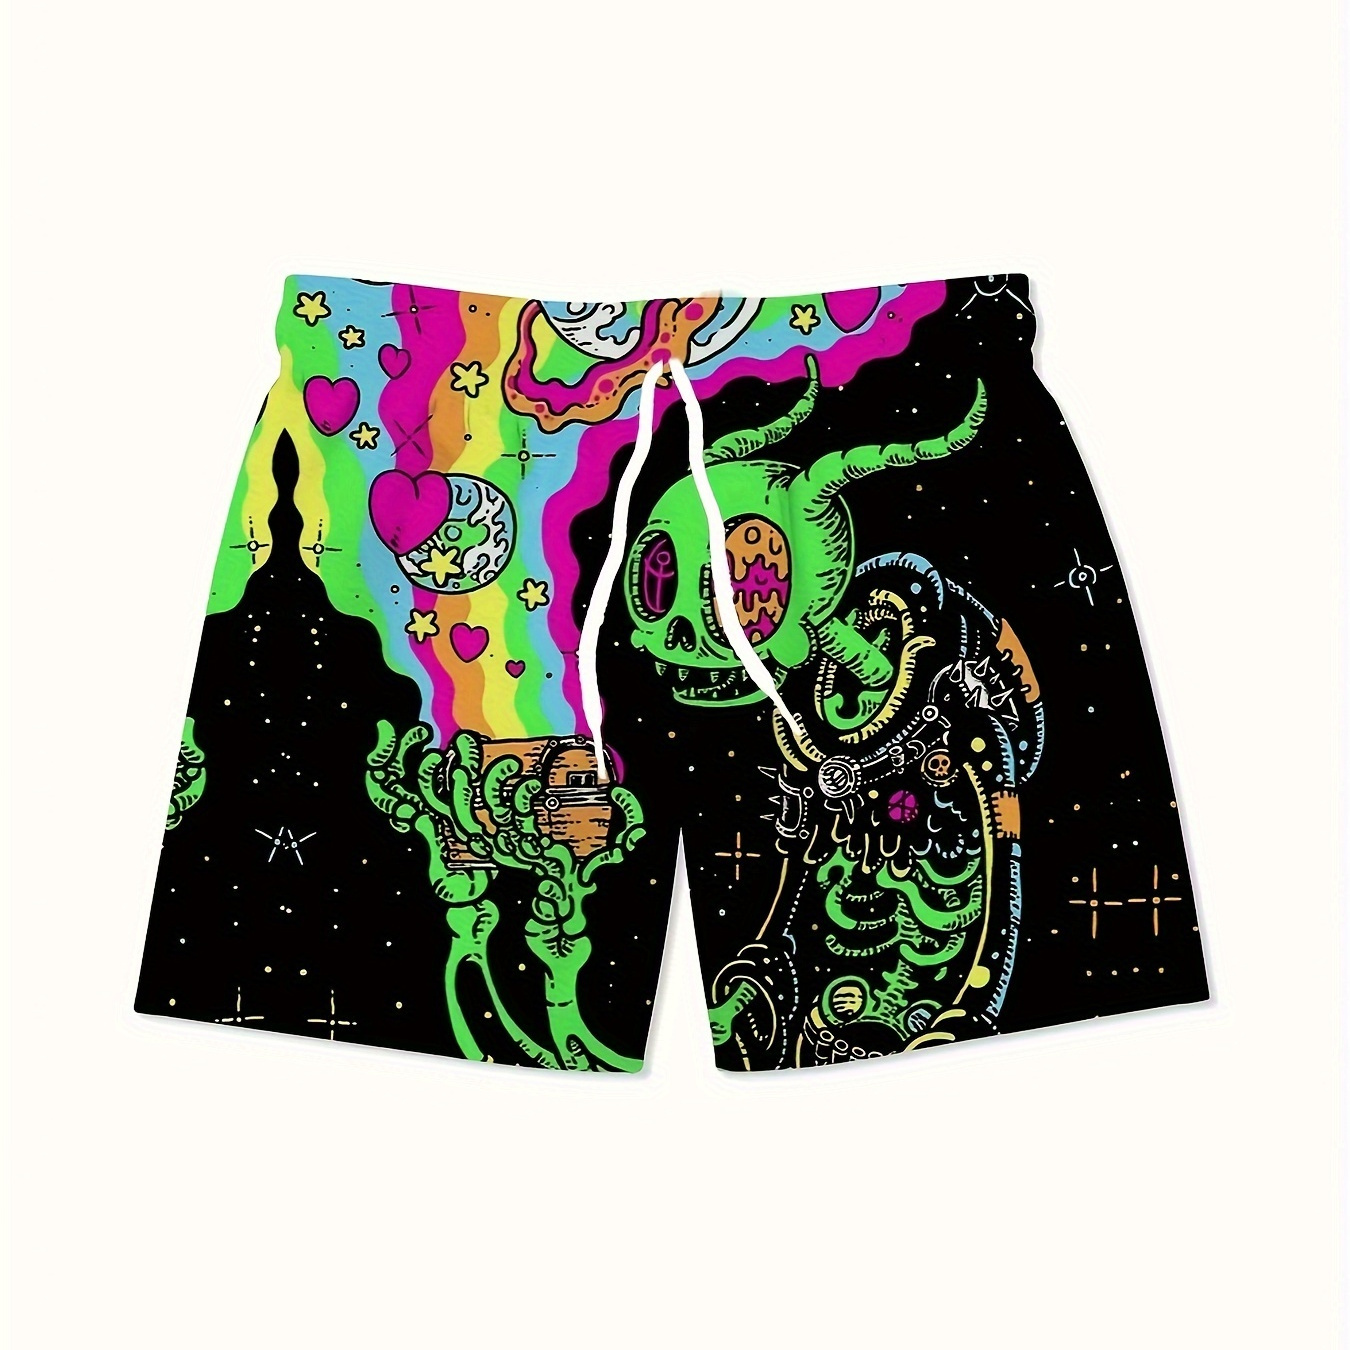 

Men's Cartoon Style Skeleton Alien Pattern Casual Shorts With Drawstring And Pockets, Novel And Stylish Shorts Suitable For Summer Street, Beach And Sports Wear